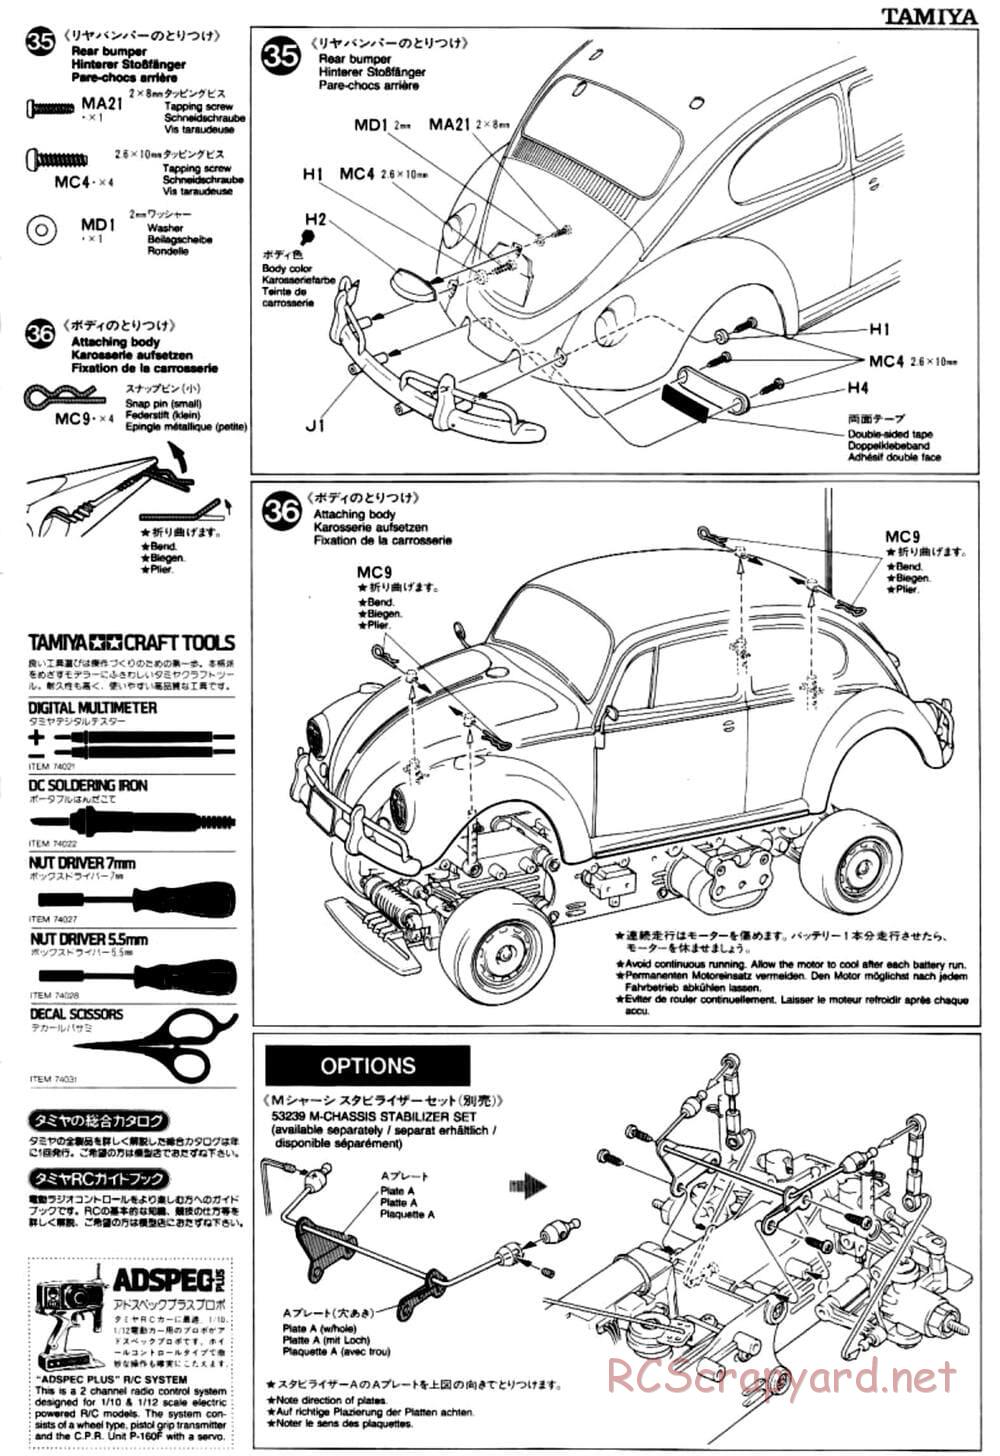 Tamiya - Volkswagen Beetle - M02L Chassis - Manual - Page 19